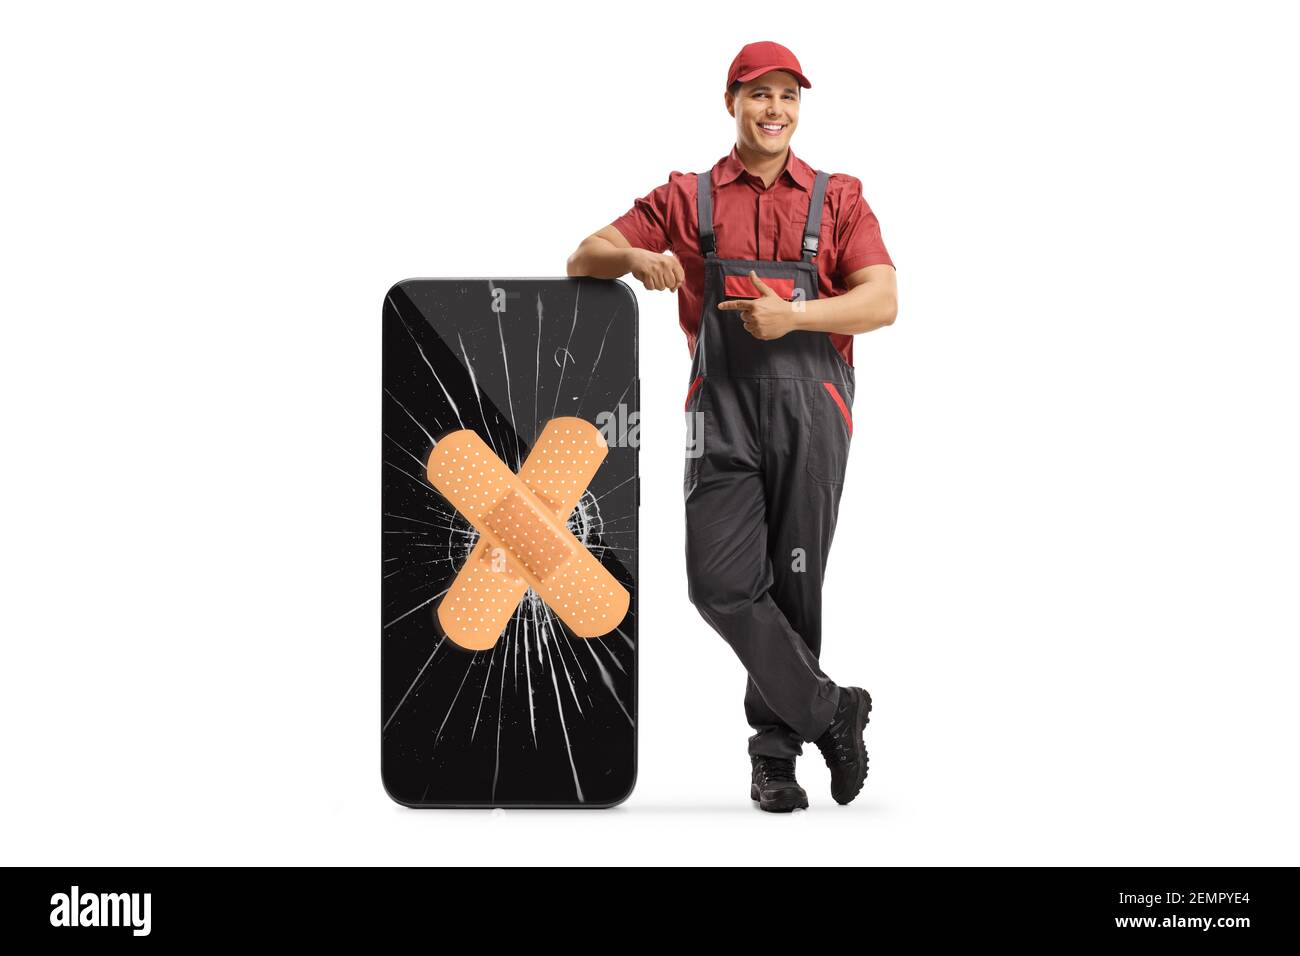 Mobile phone technician leaning on a smartphone with a cracked screen and band aid and pointing isolated on white background Stock Photo